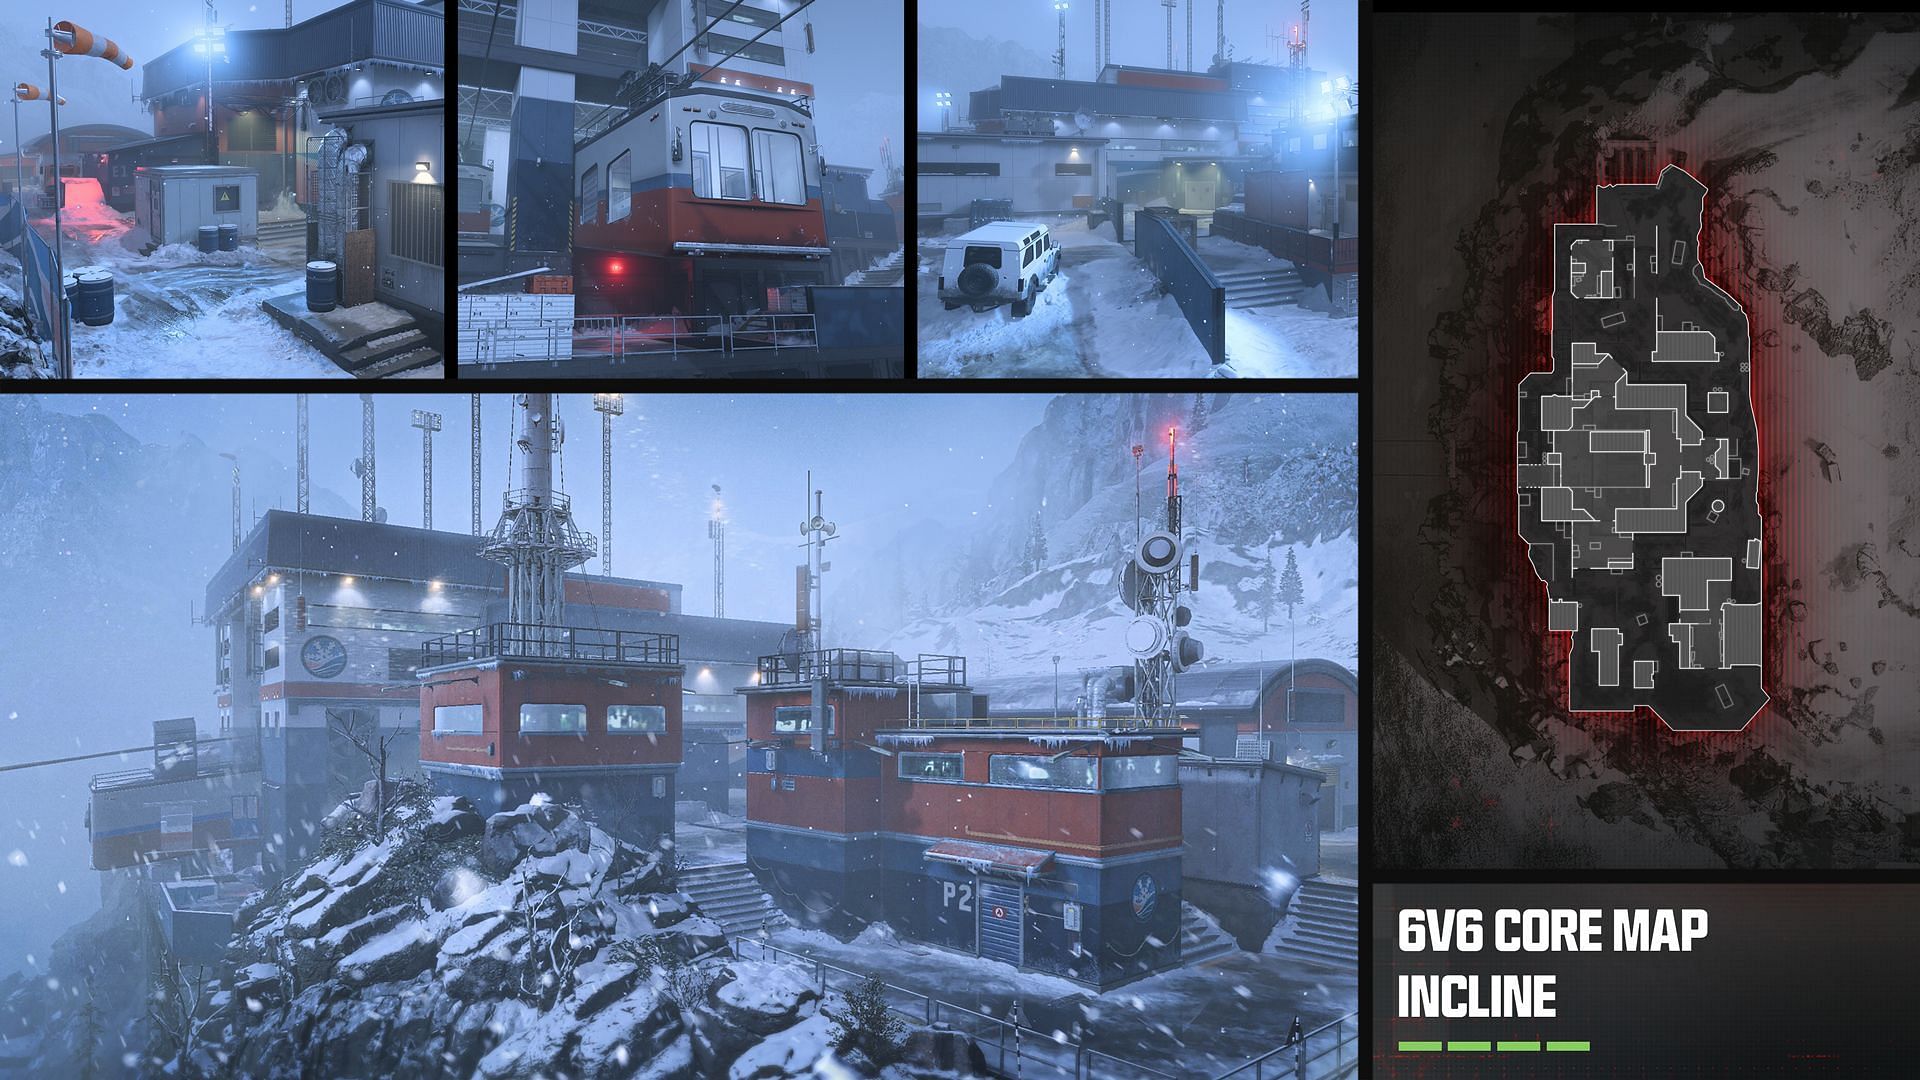 Incline is a brand new 6v6 core map for MW3 in Season 4 Reloaded (Image via Activision)